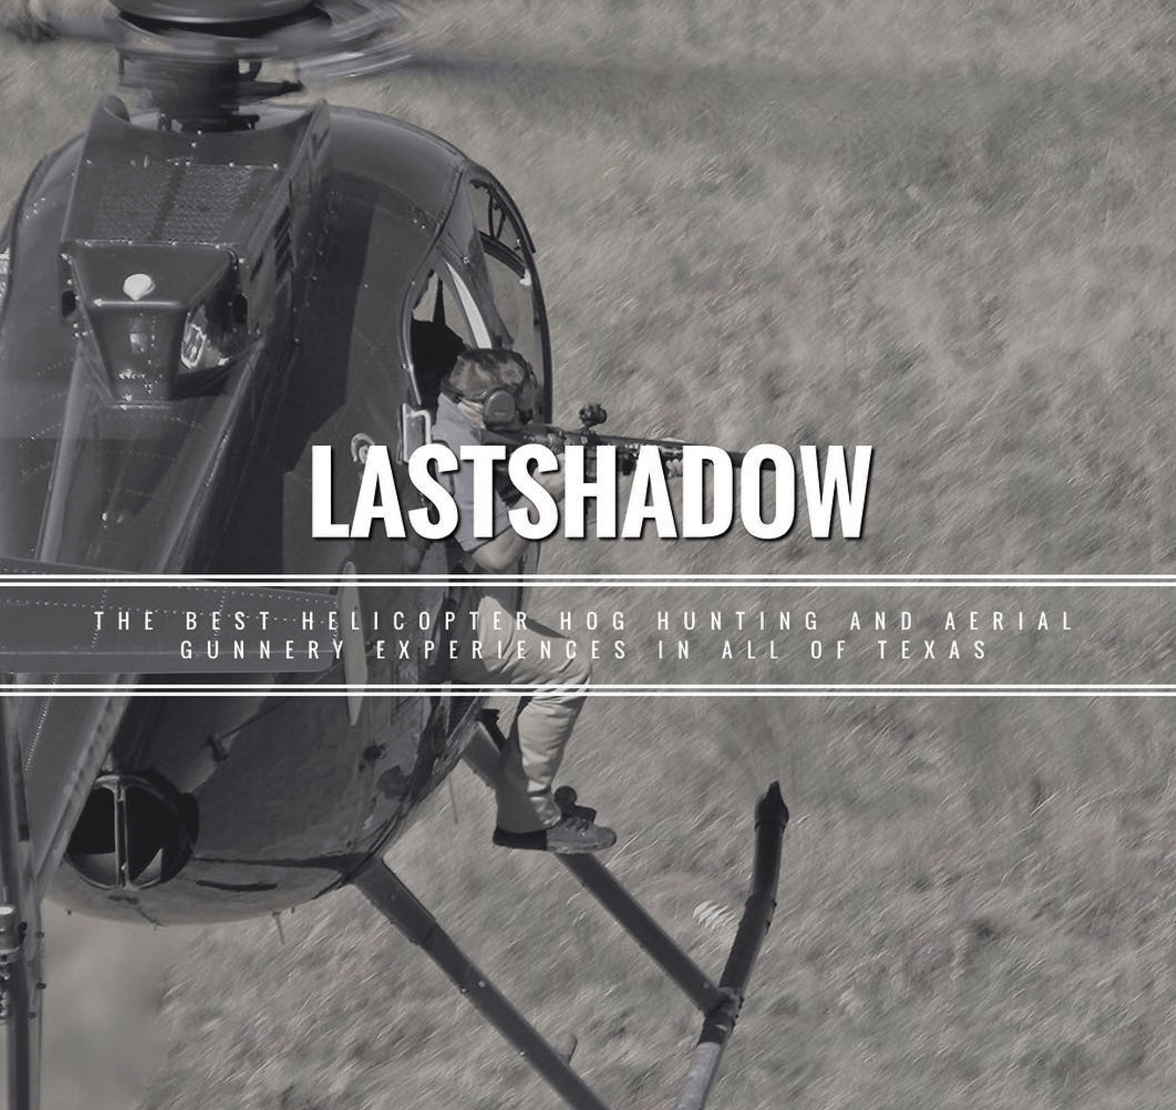 Last Shadow: Full Service Expidition